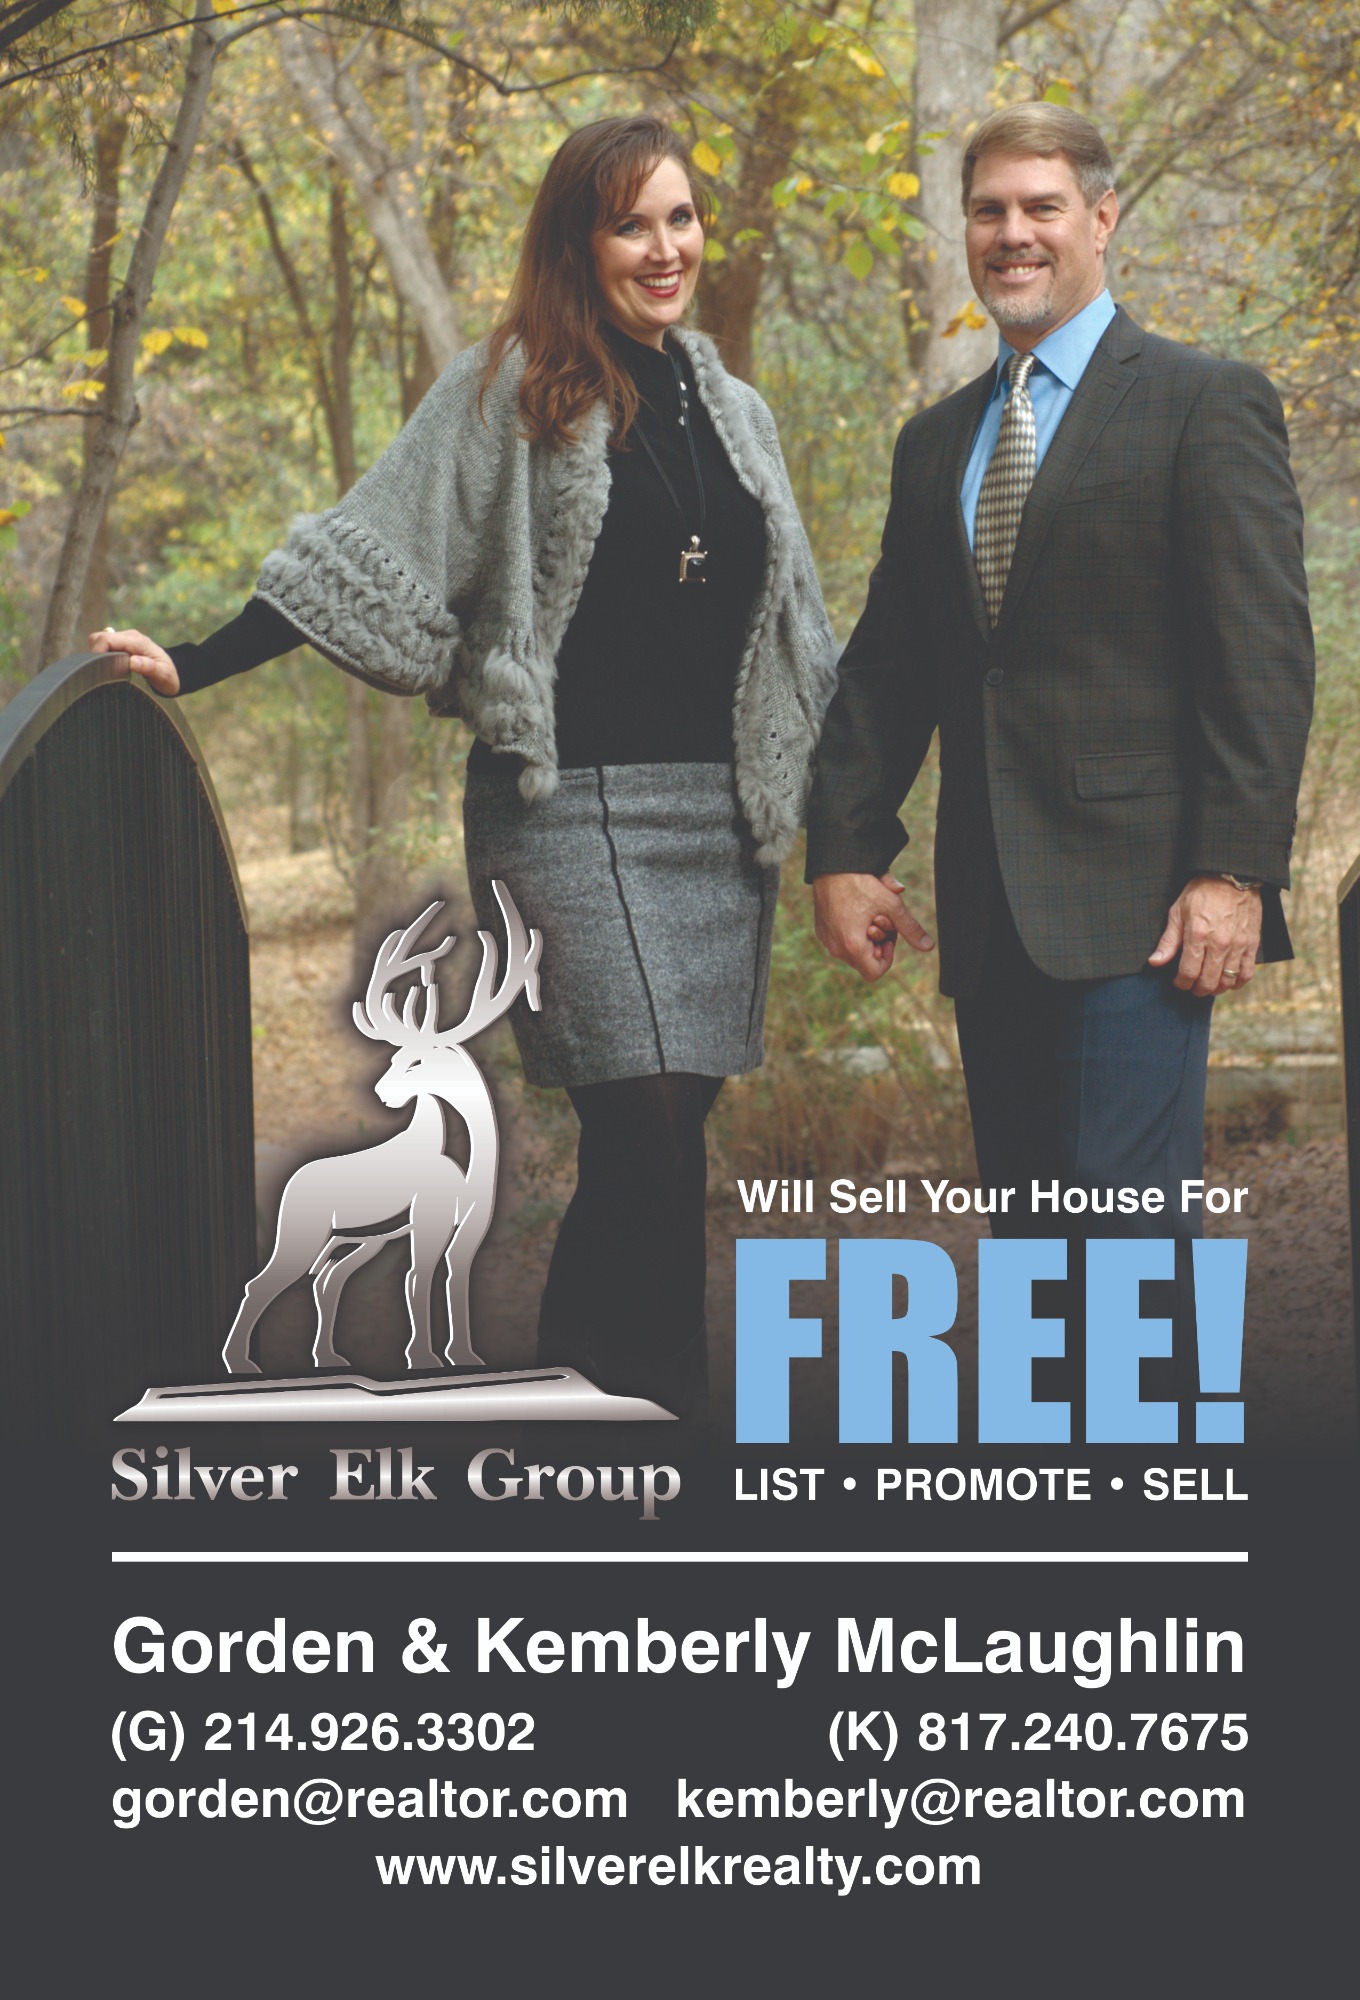 Sell Your Home Free With Silver Elk Group